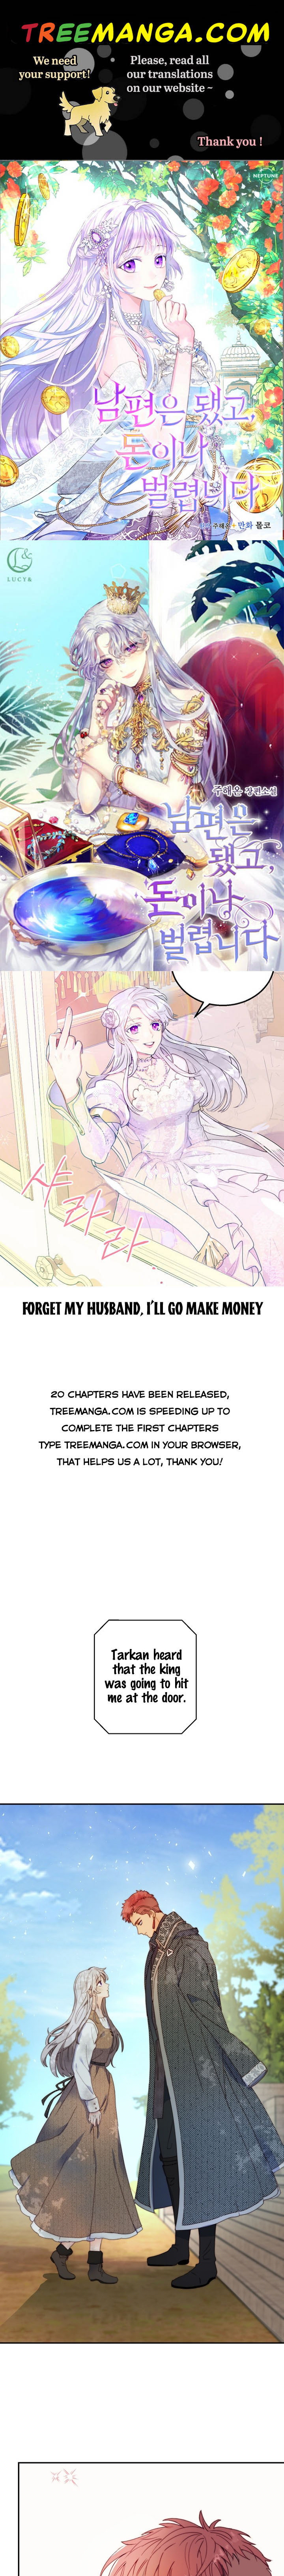 Forget My Husband, I’Ll Go Make Money - Page 1